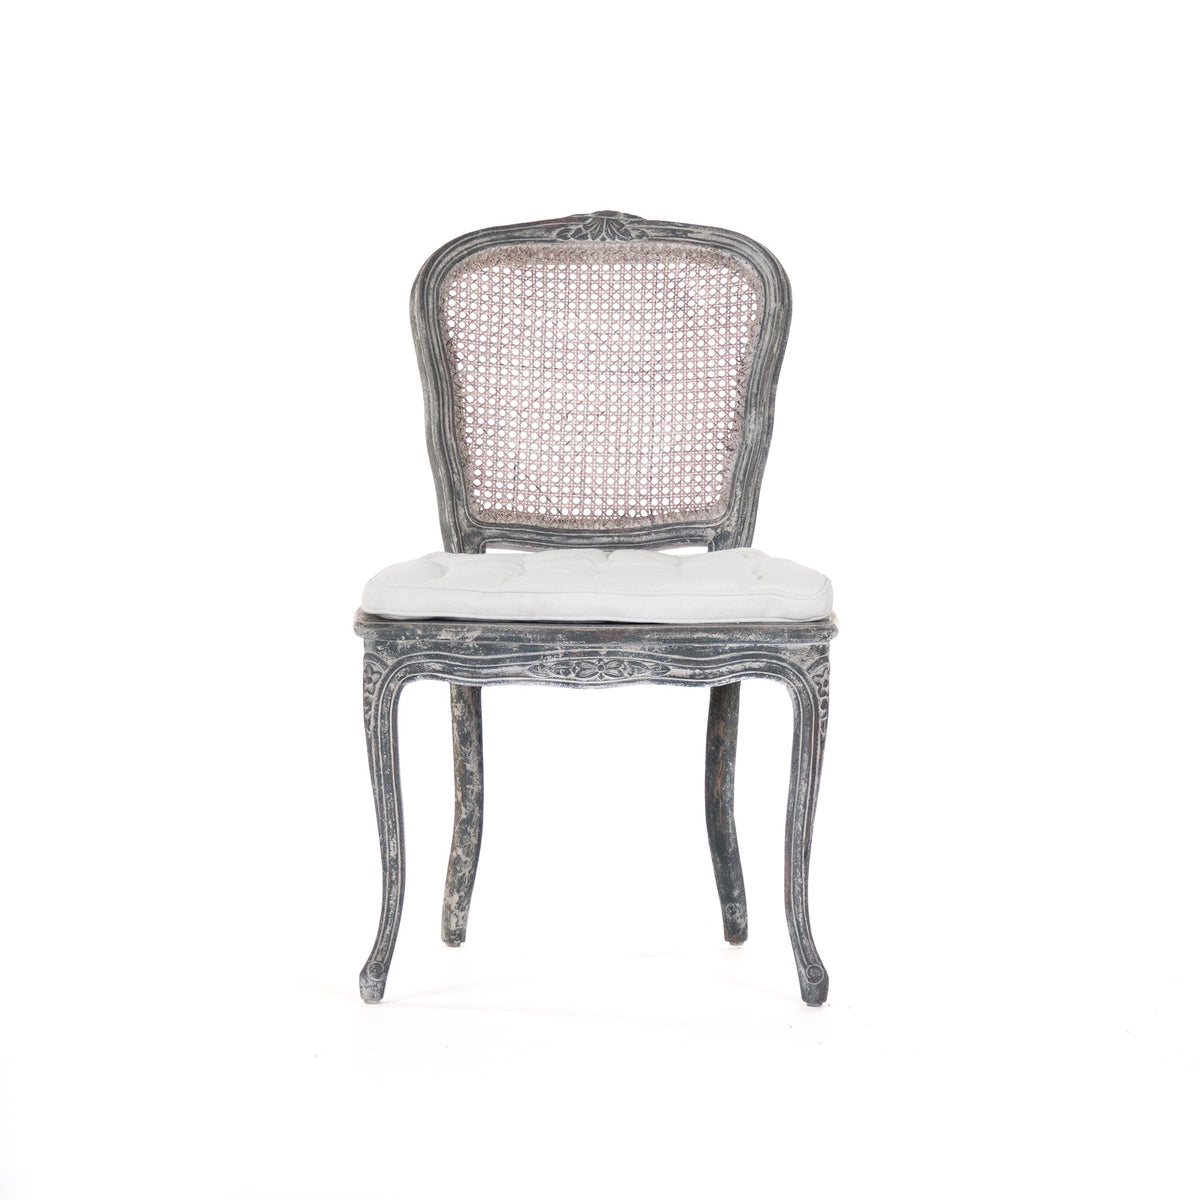 Annette Chair Distressed Blue by Zentique